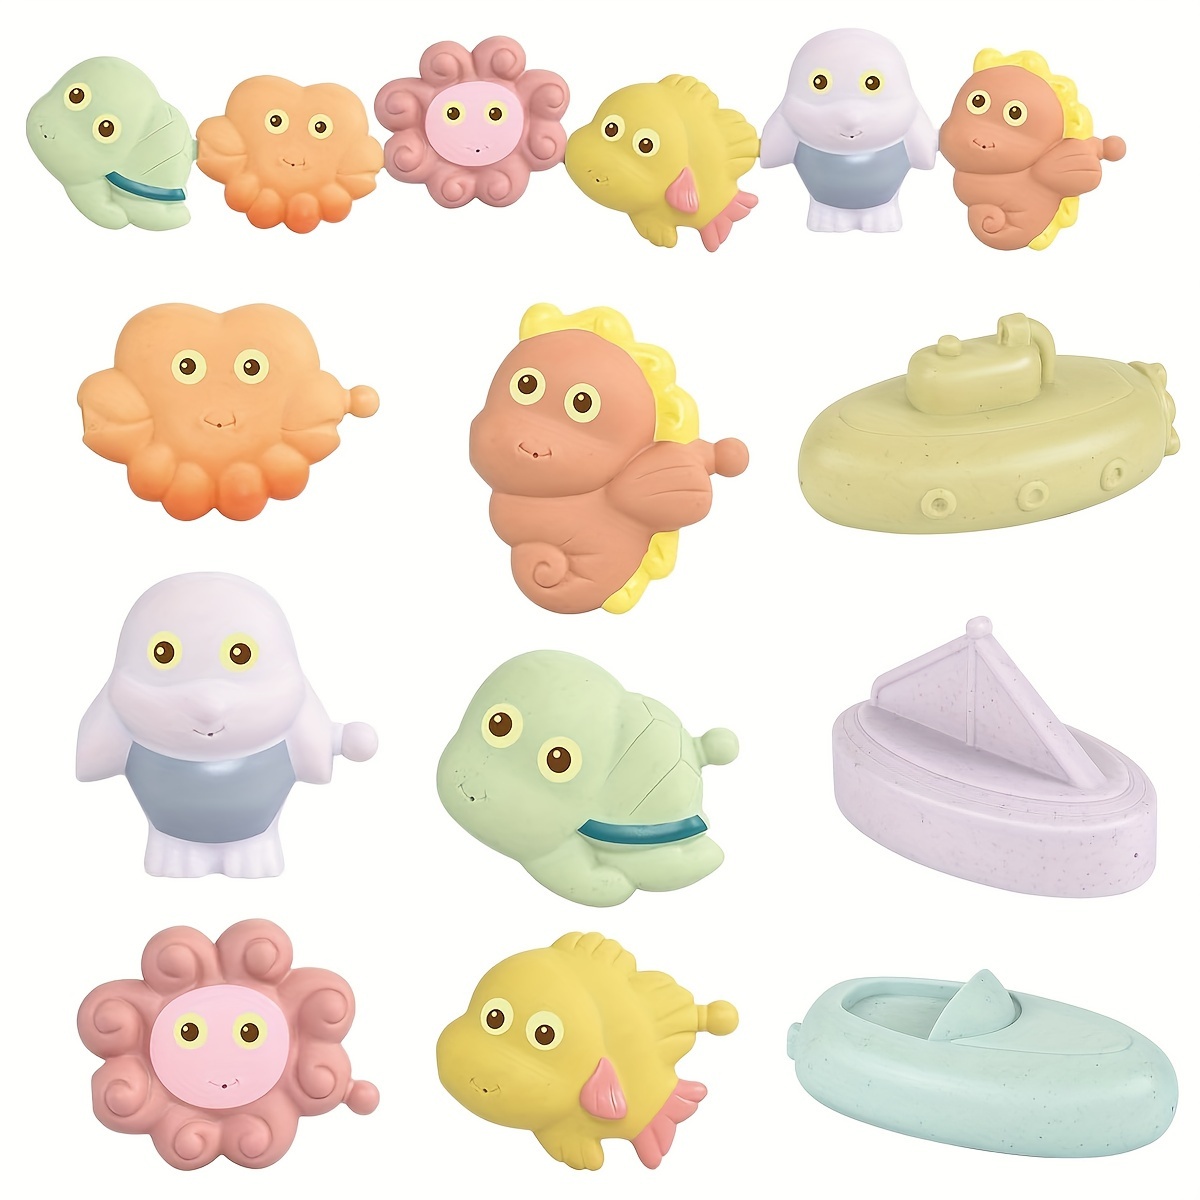 9 Pcs Mold Free Baby Bath Toys, Straw Material Silicone Bathtub Toys/  Building Animal & Floating Boats, Squeeze Play Early Educational Learning  Nestin